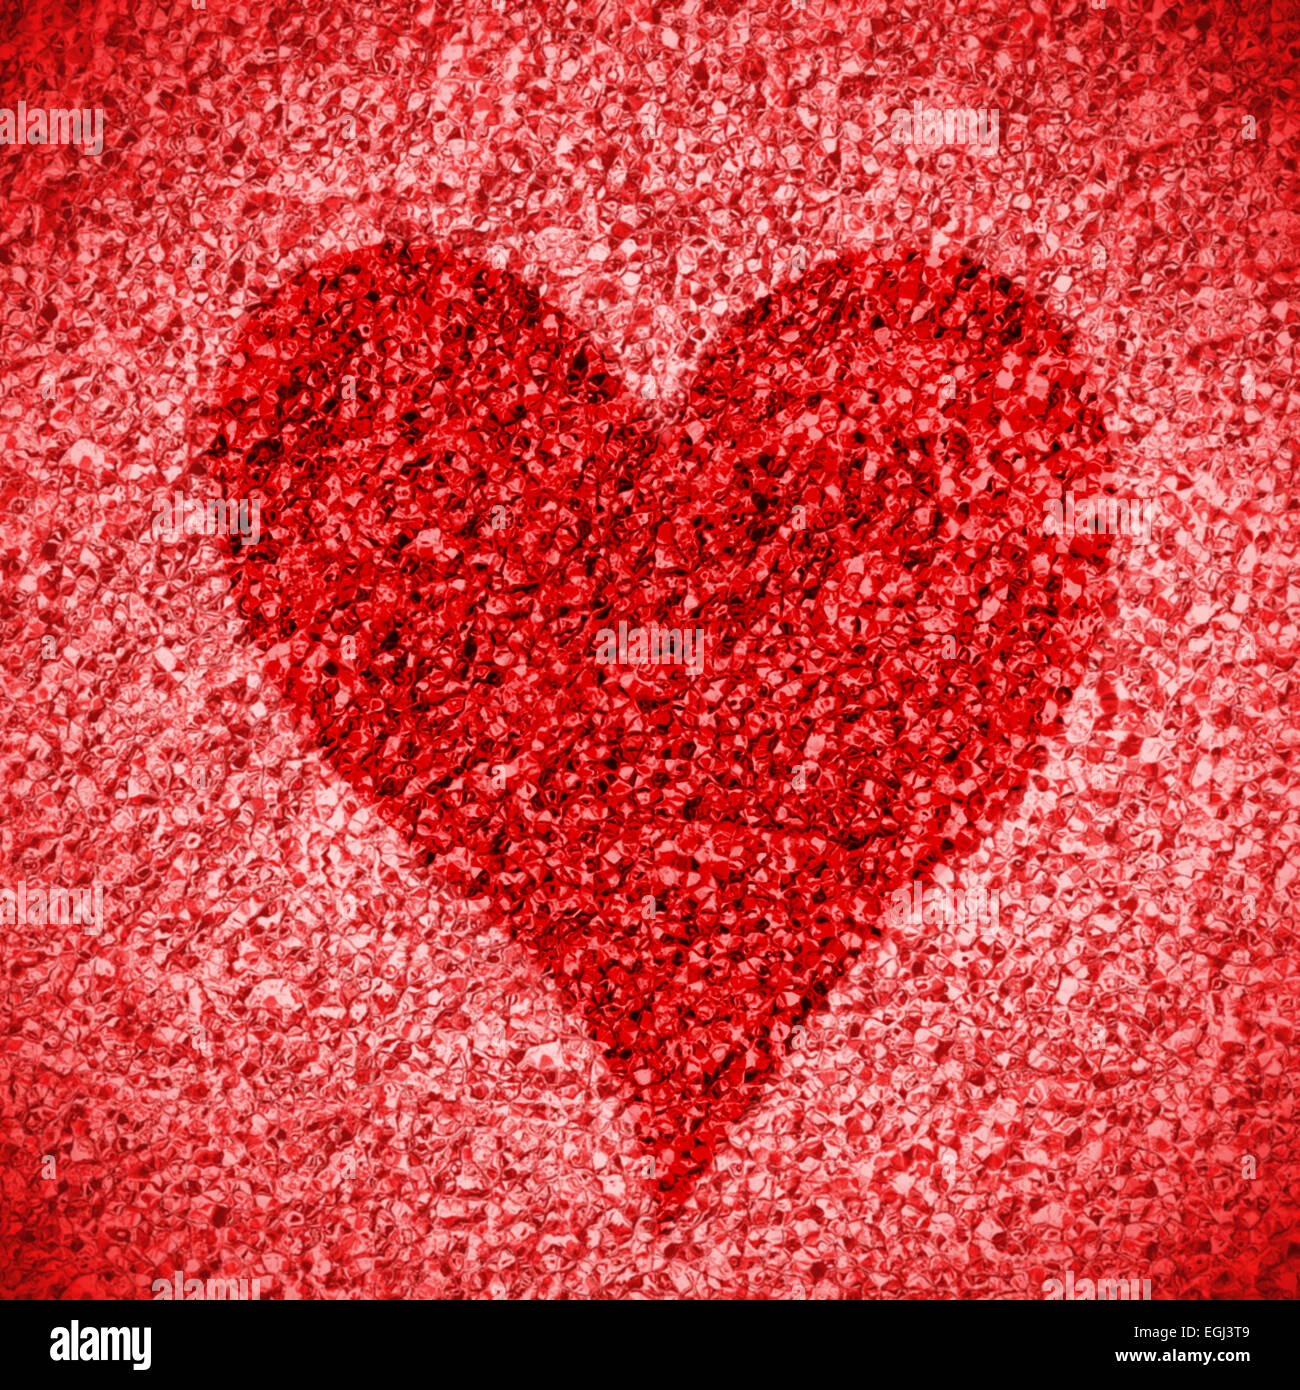 Grunge heart background made of abstract shapes. Stock Photo